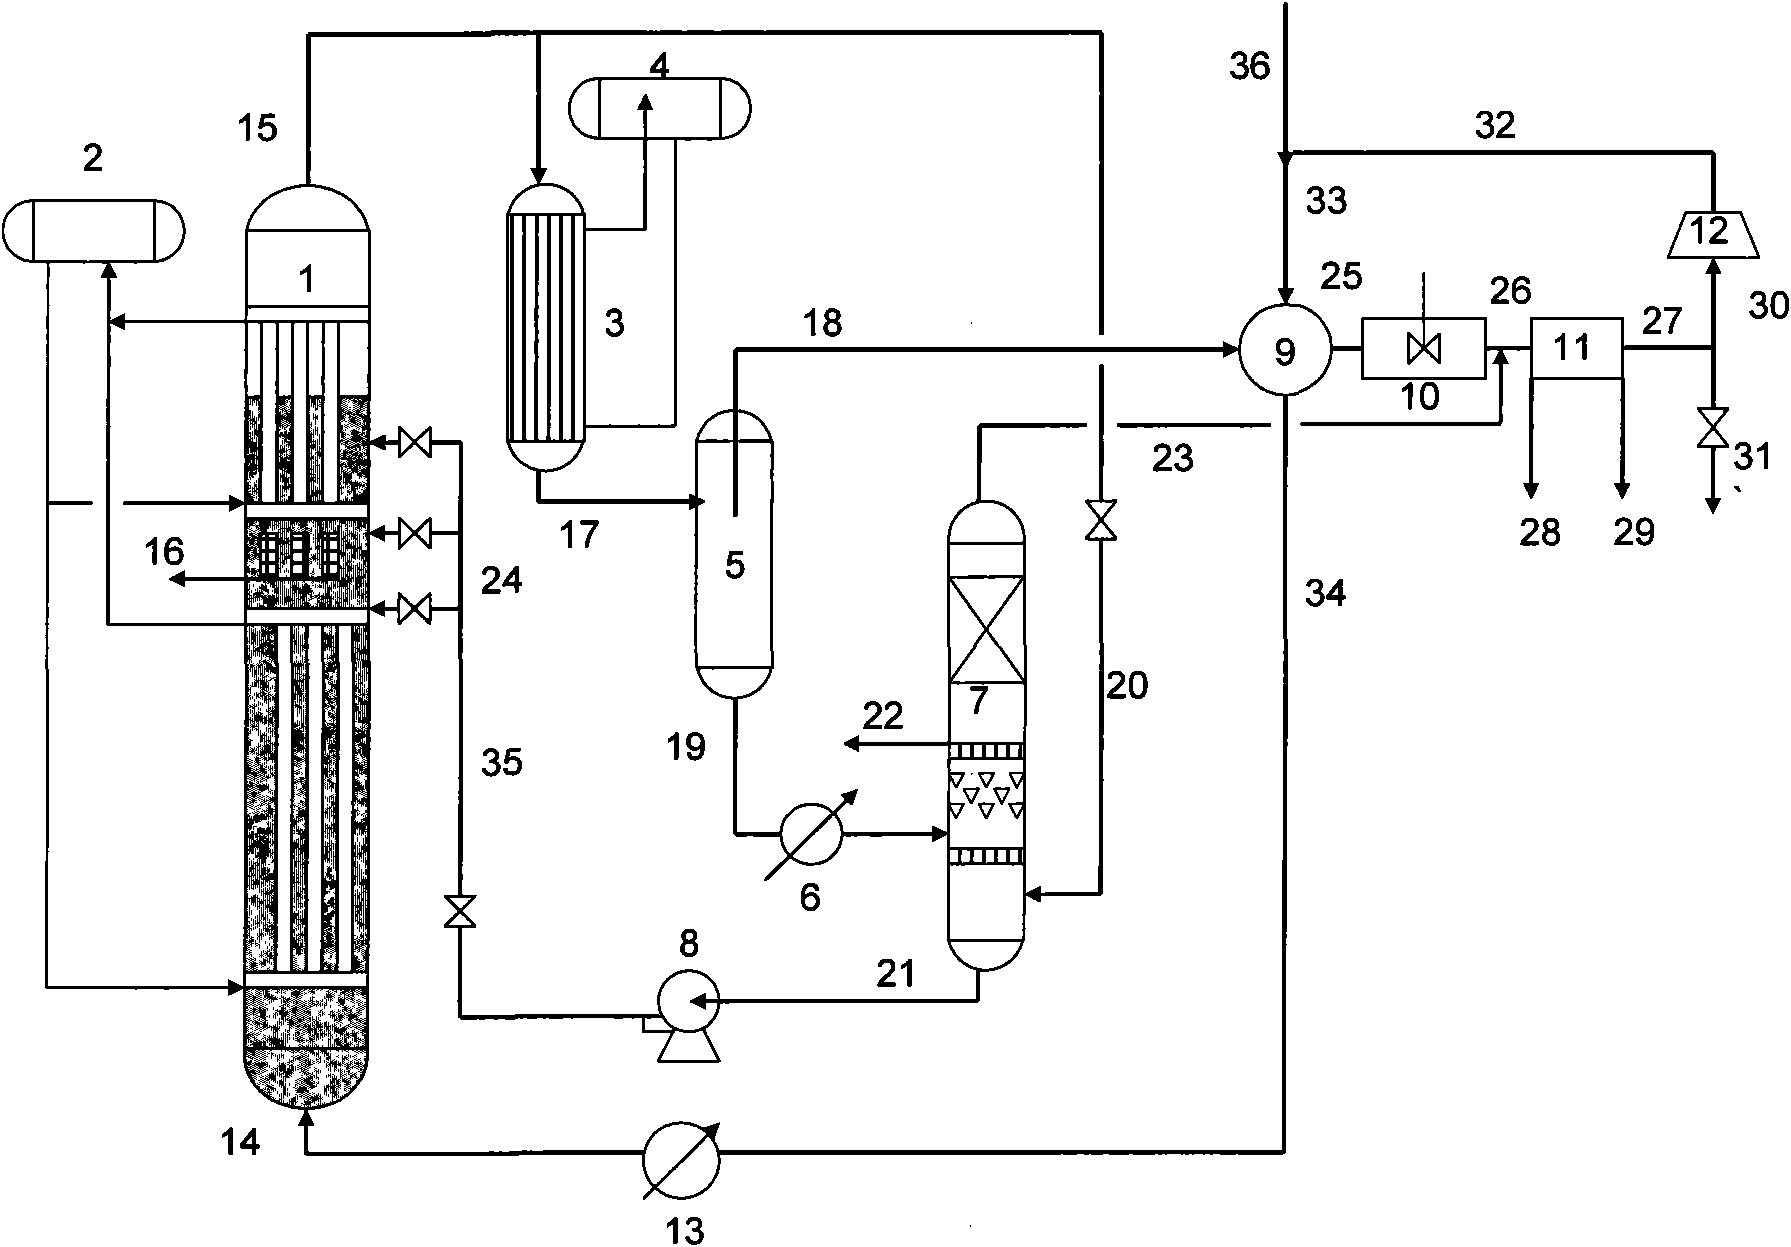 Equipment system for Fischer-Tropsch synthetic reaction and application thereof